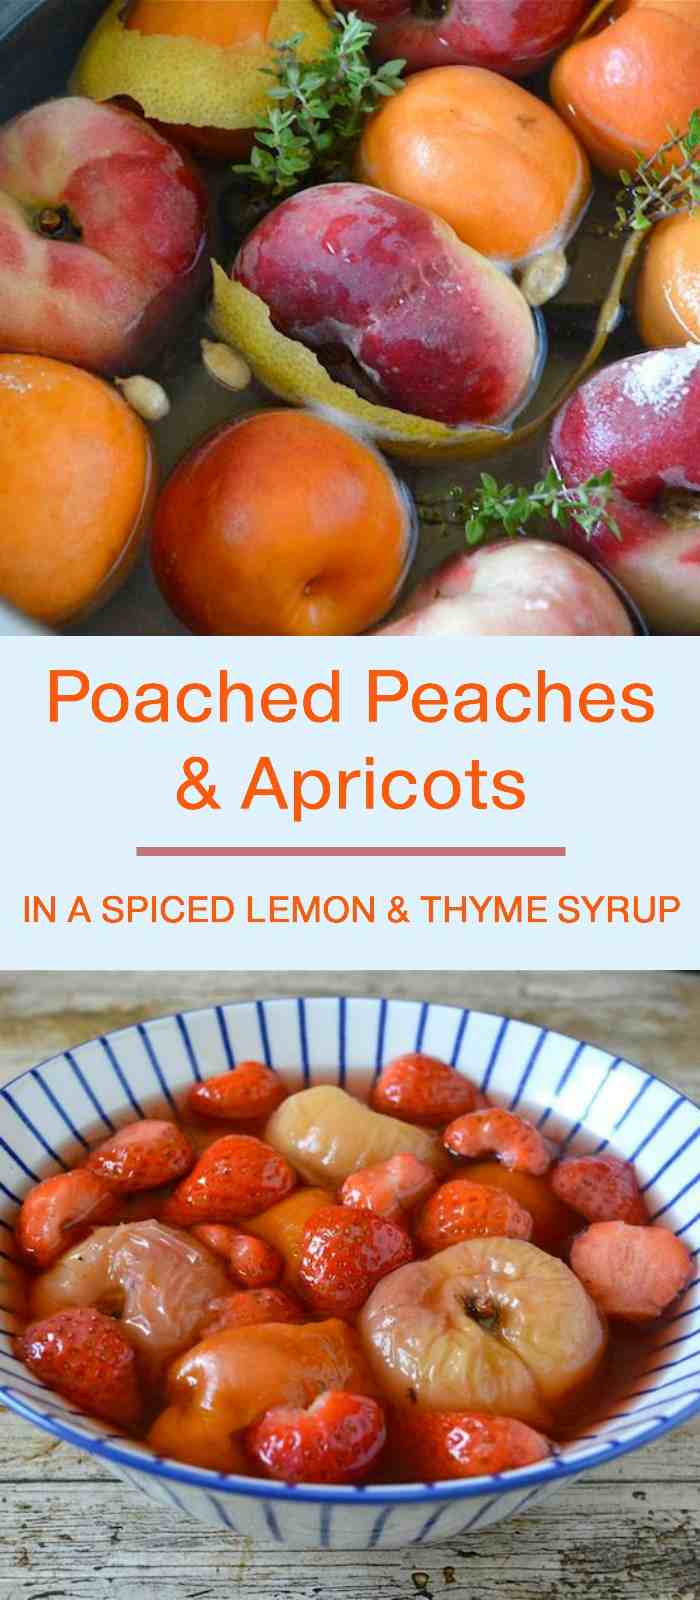 Poached Peaches & Apricots in a Spiced Lemon & Thyme Syrup